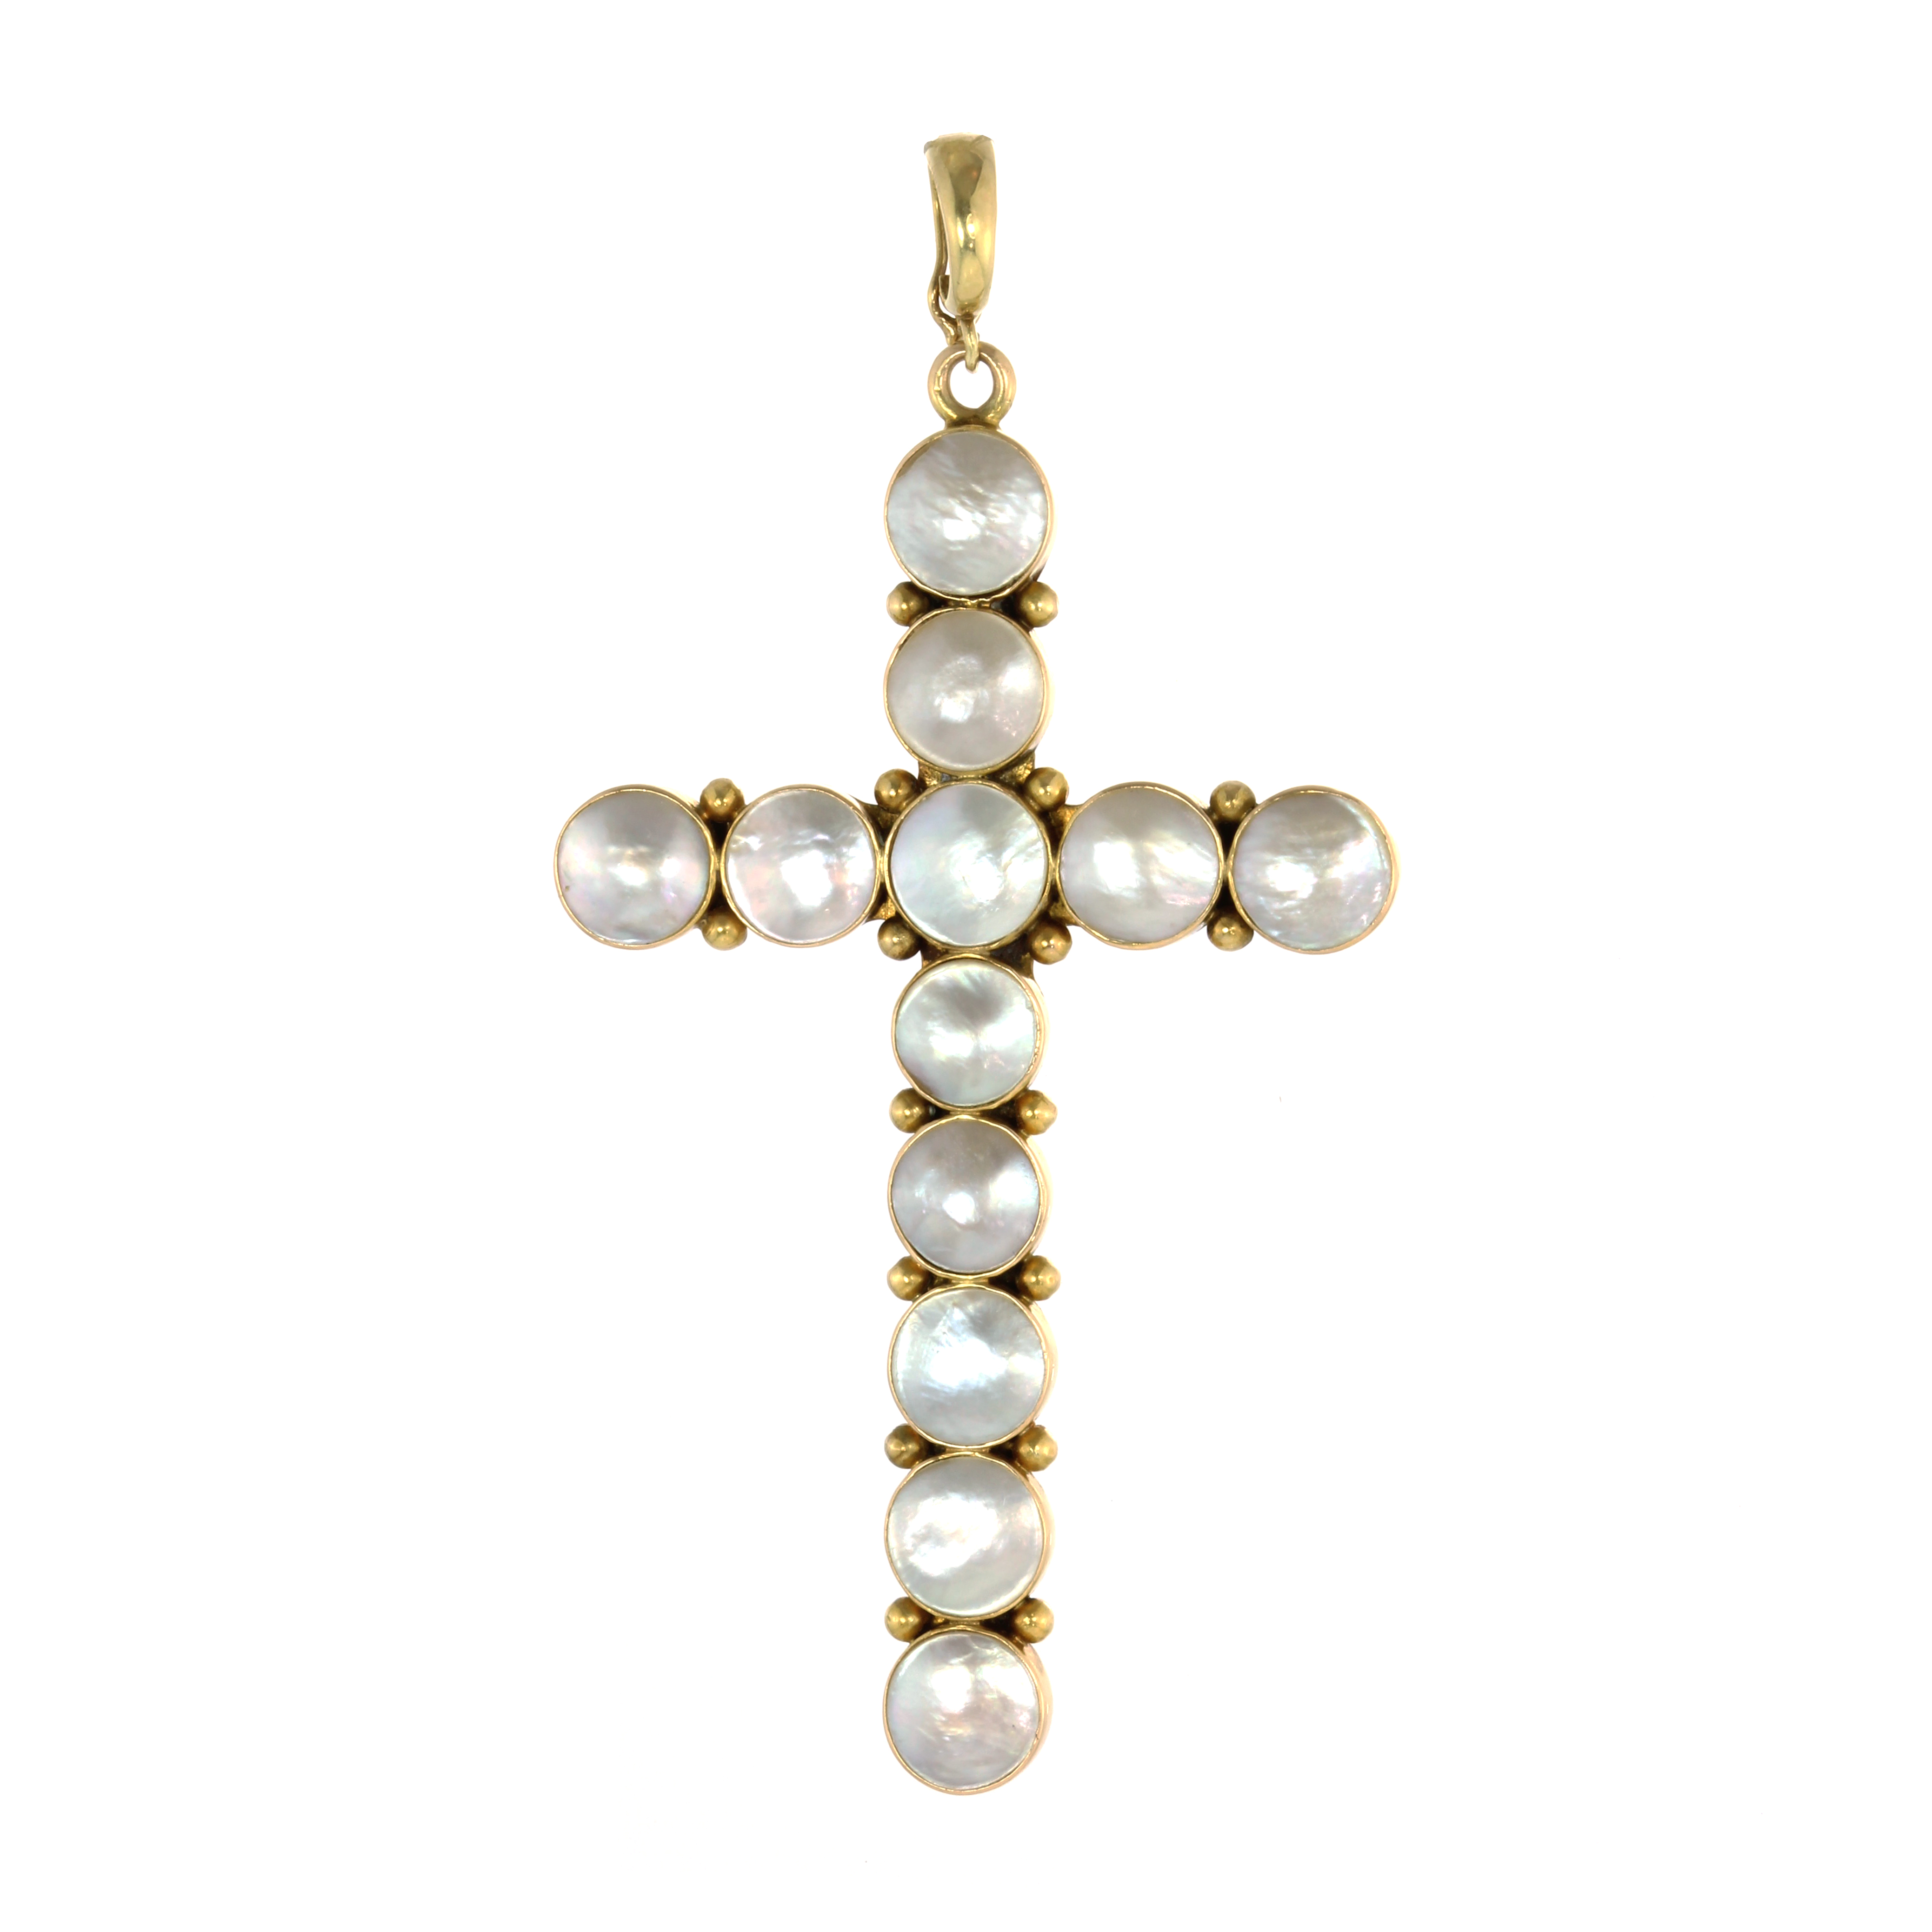 A MOTHER OF PEARL CRUCIFIX / CROSS PENDANT designed as a traditional cross made of up twelve